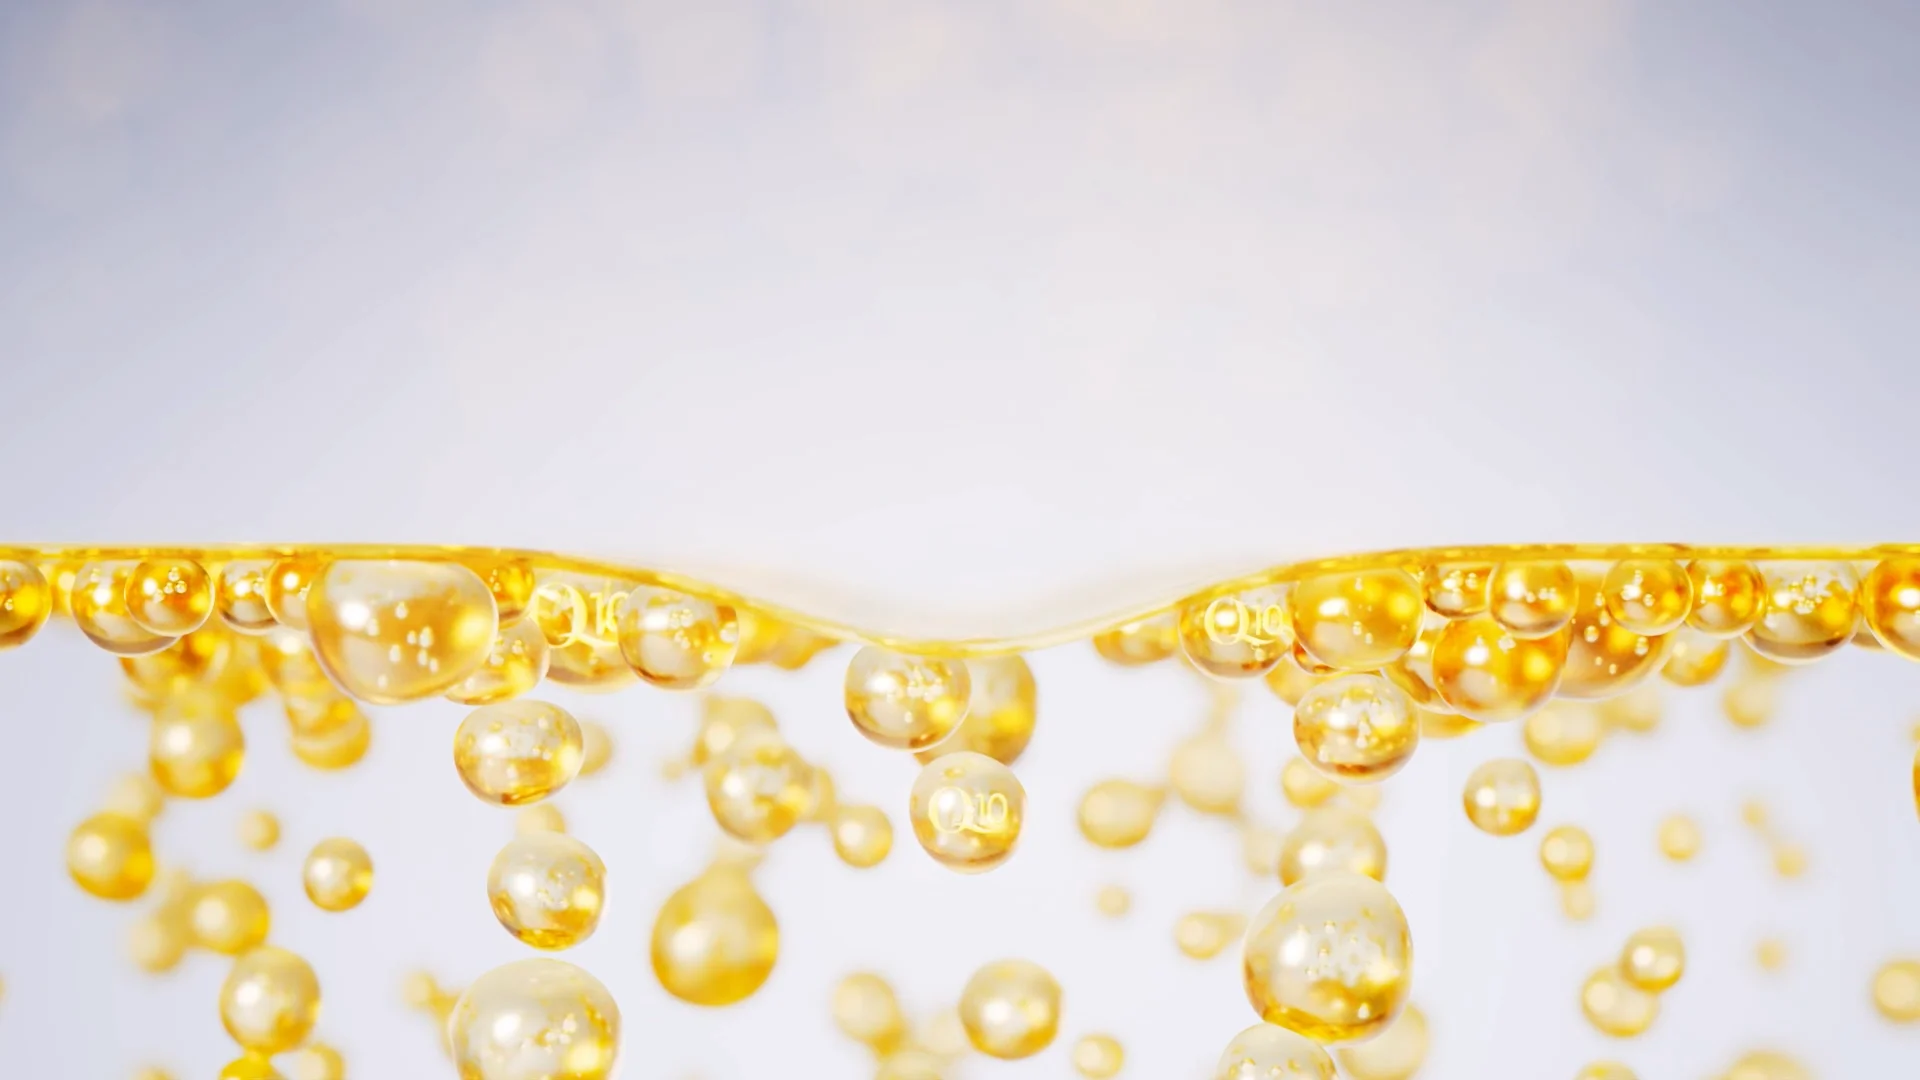 several golden bubbles with littel Q10 letters on it swimming in a transparent liquid